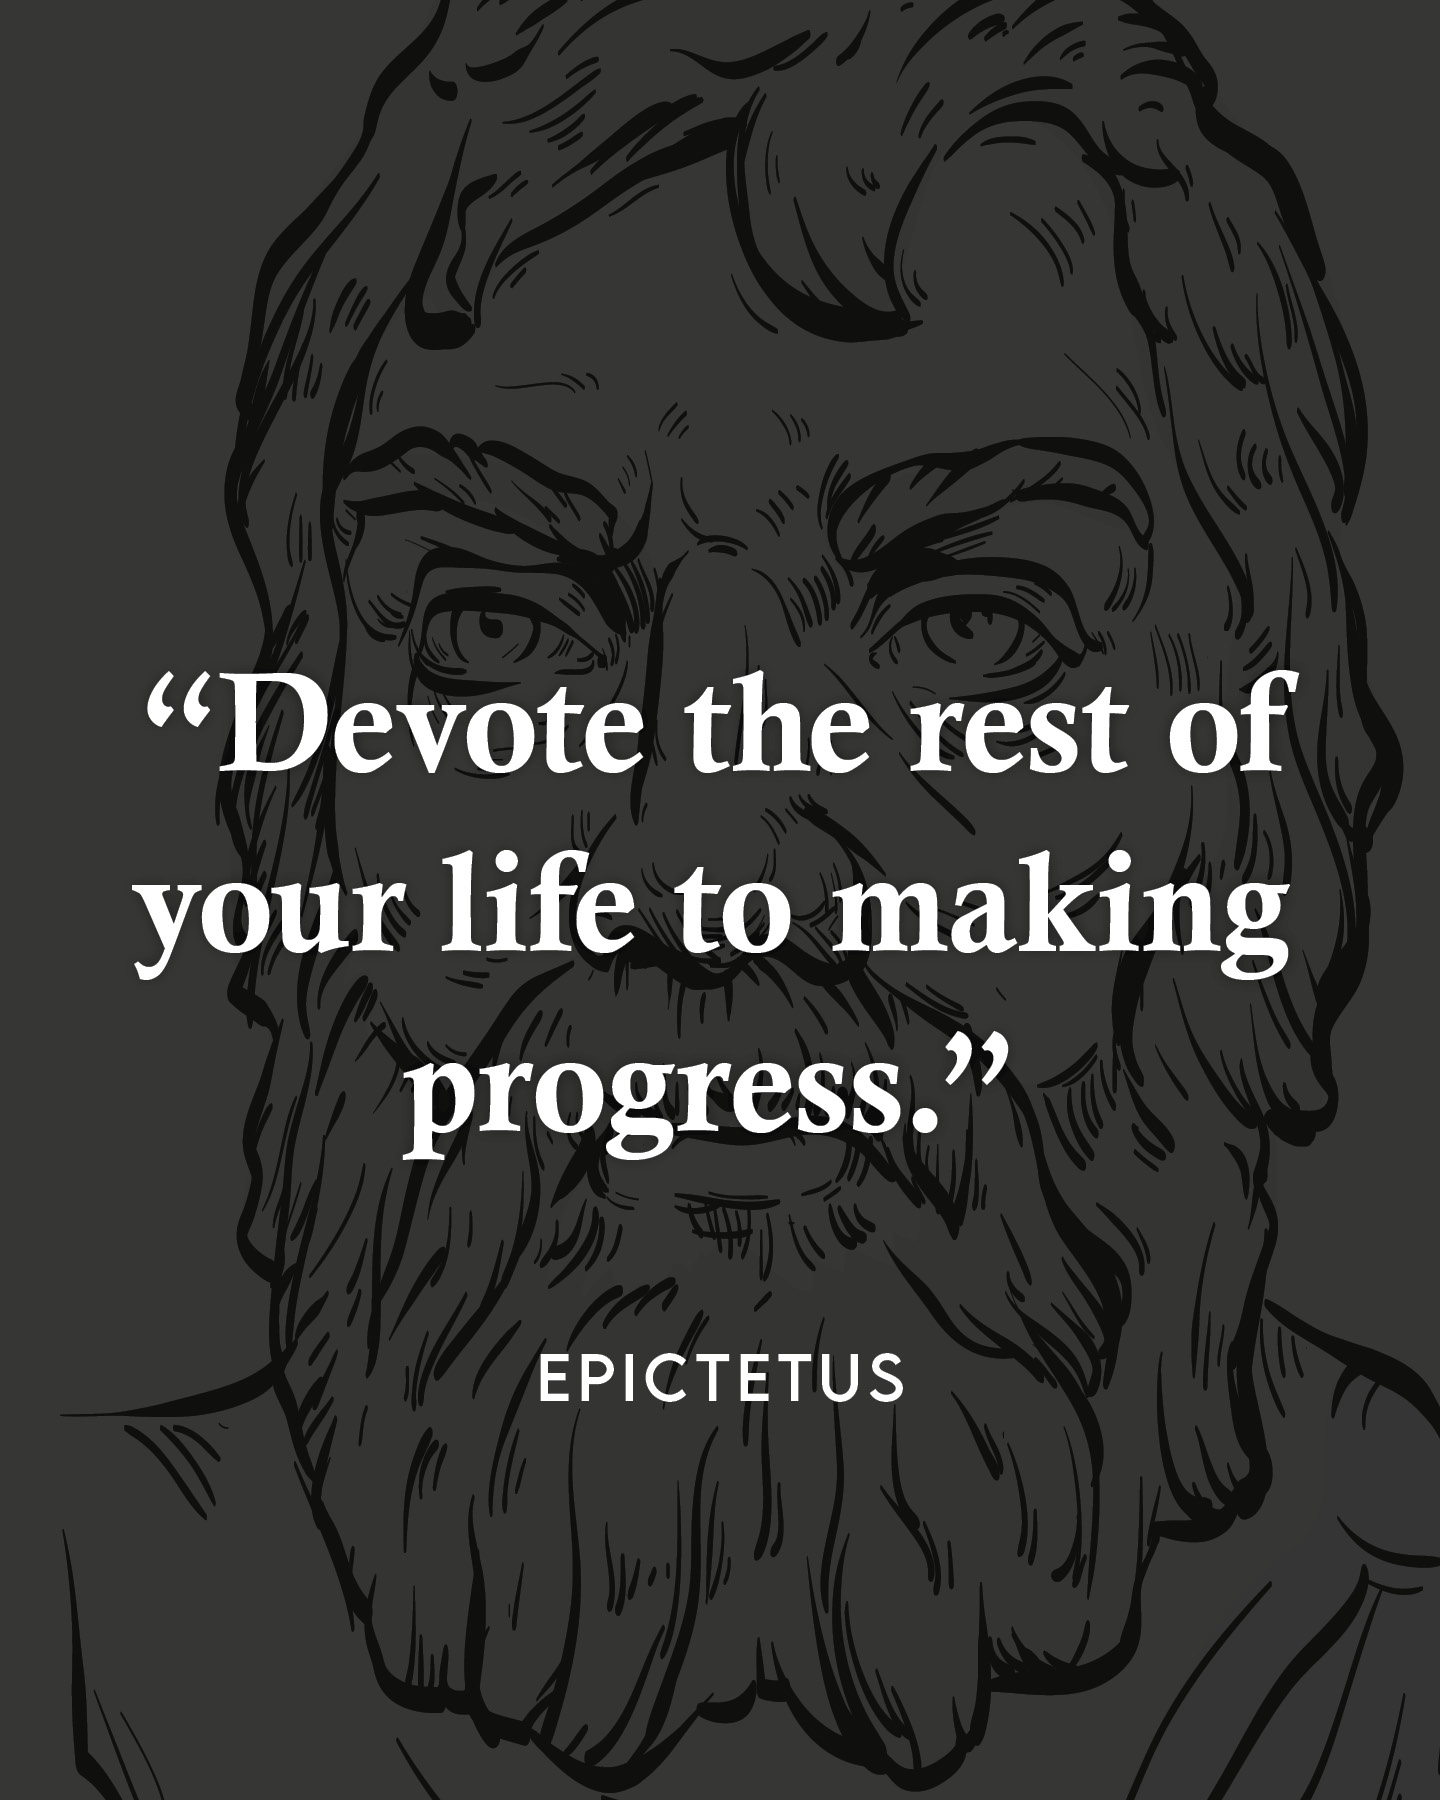 Devote the rest of your life to making progress.